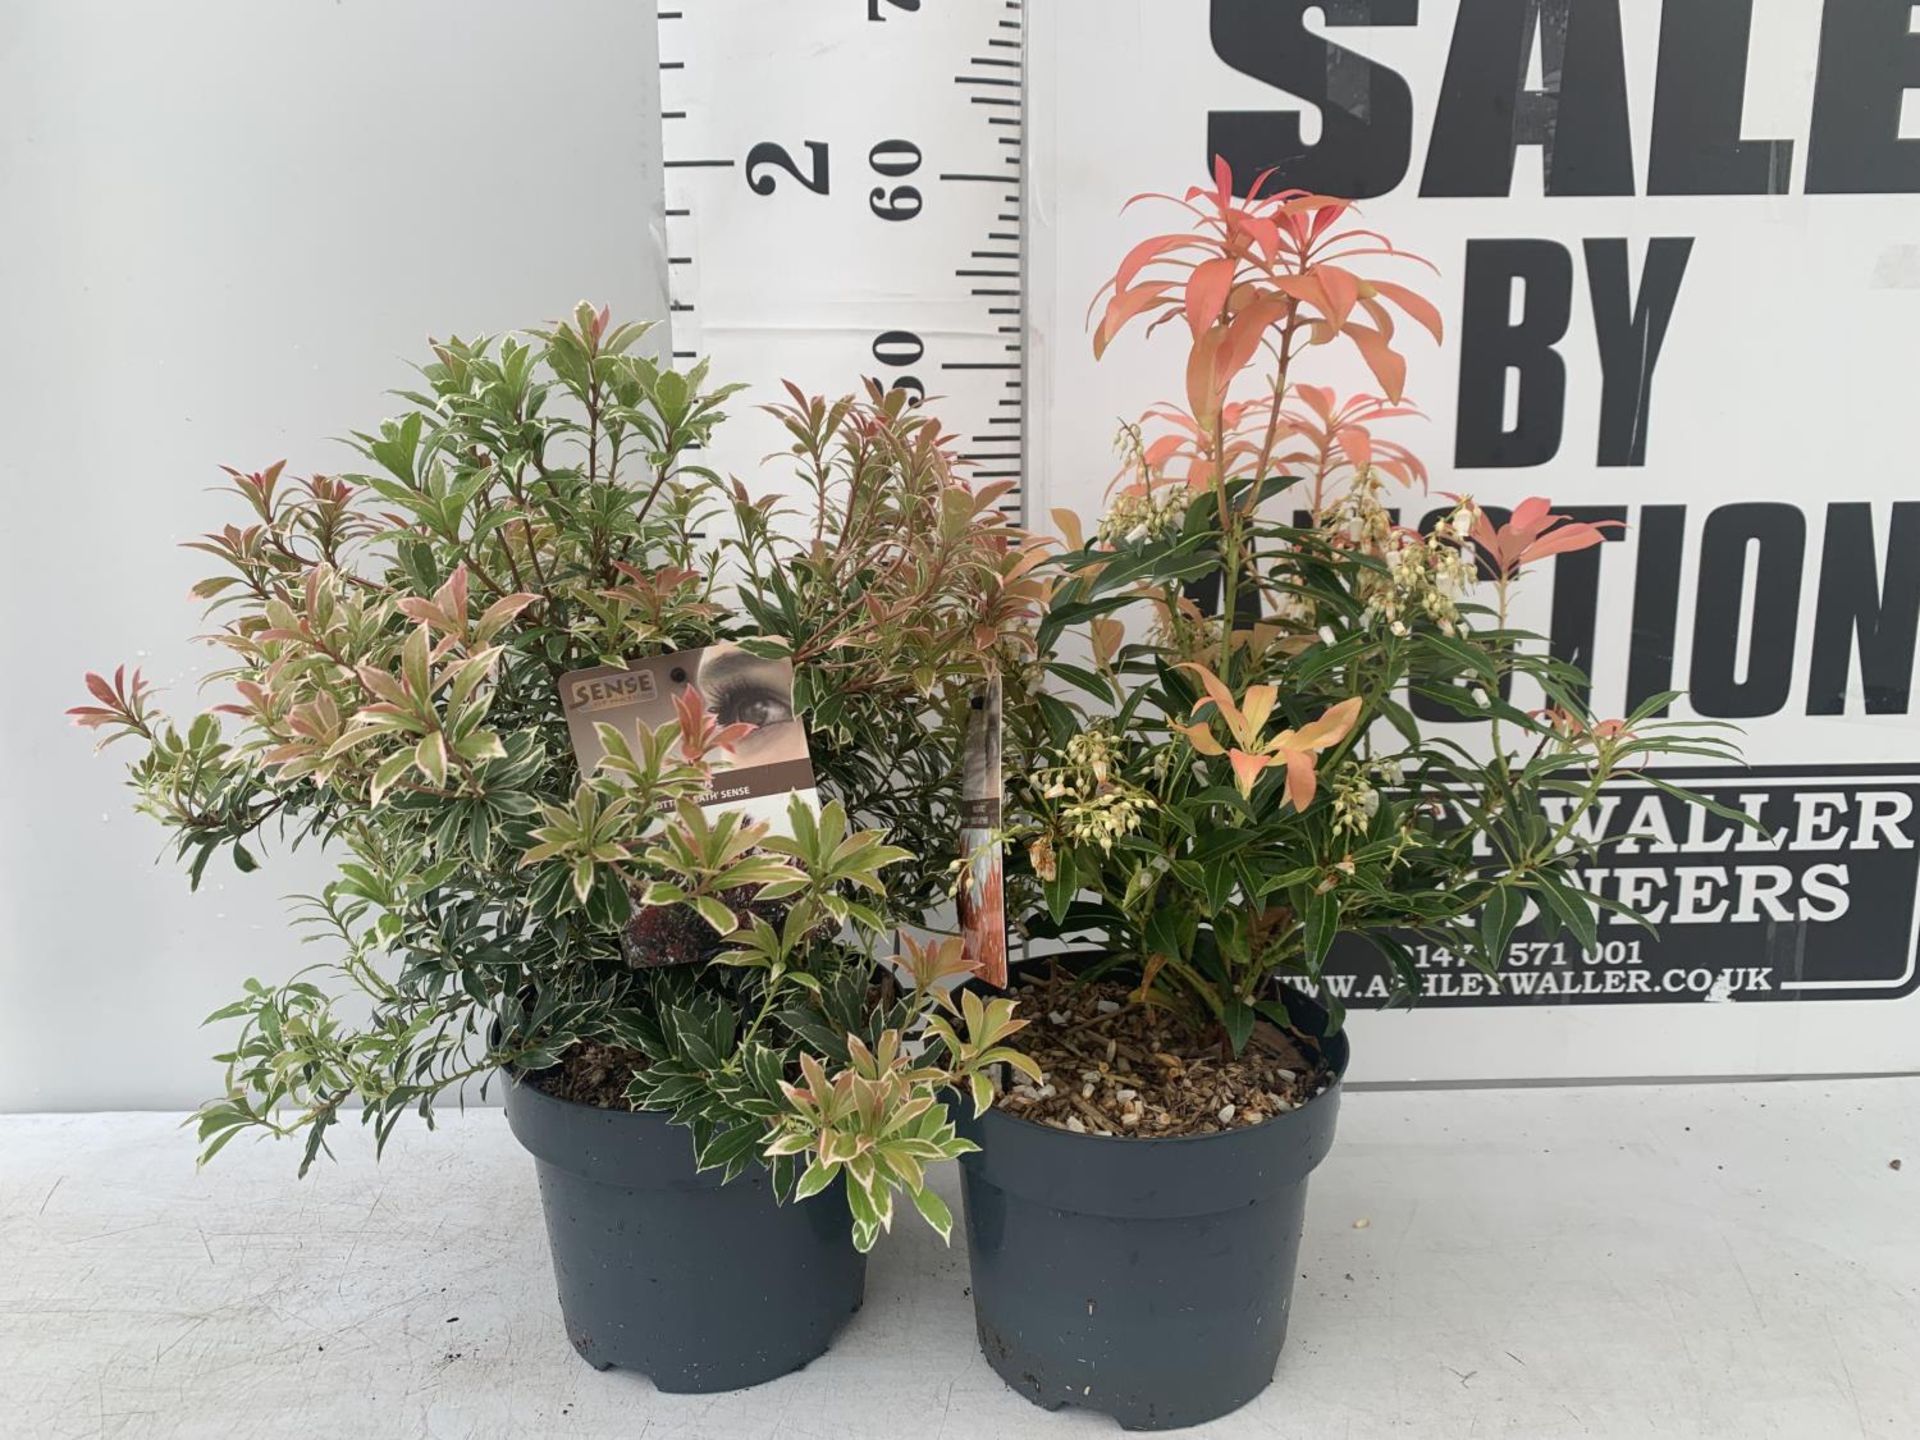 TWO PIERIS JAPONICA 'LITTLE HEATH' AND 'FOREST FLAME' IN 3 LTR POTS 55CM TALL PLUS VAT TO BE SOLD